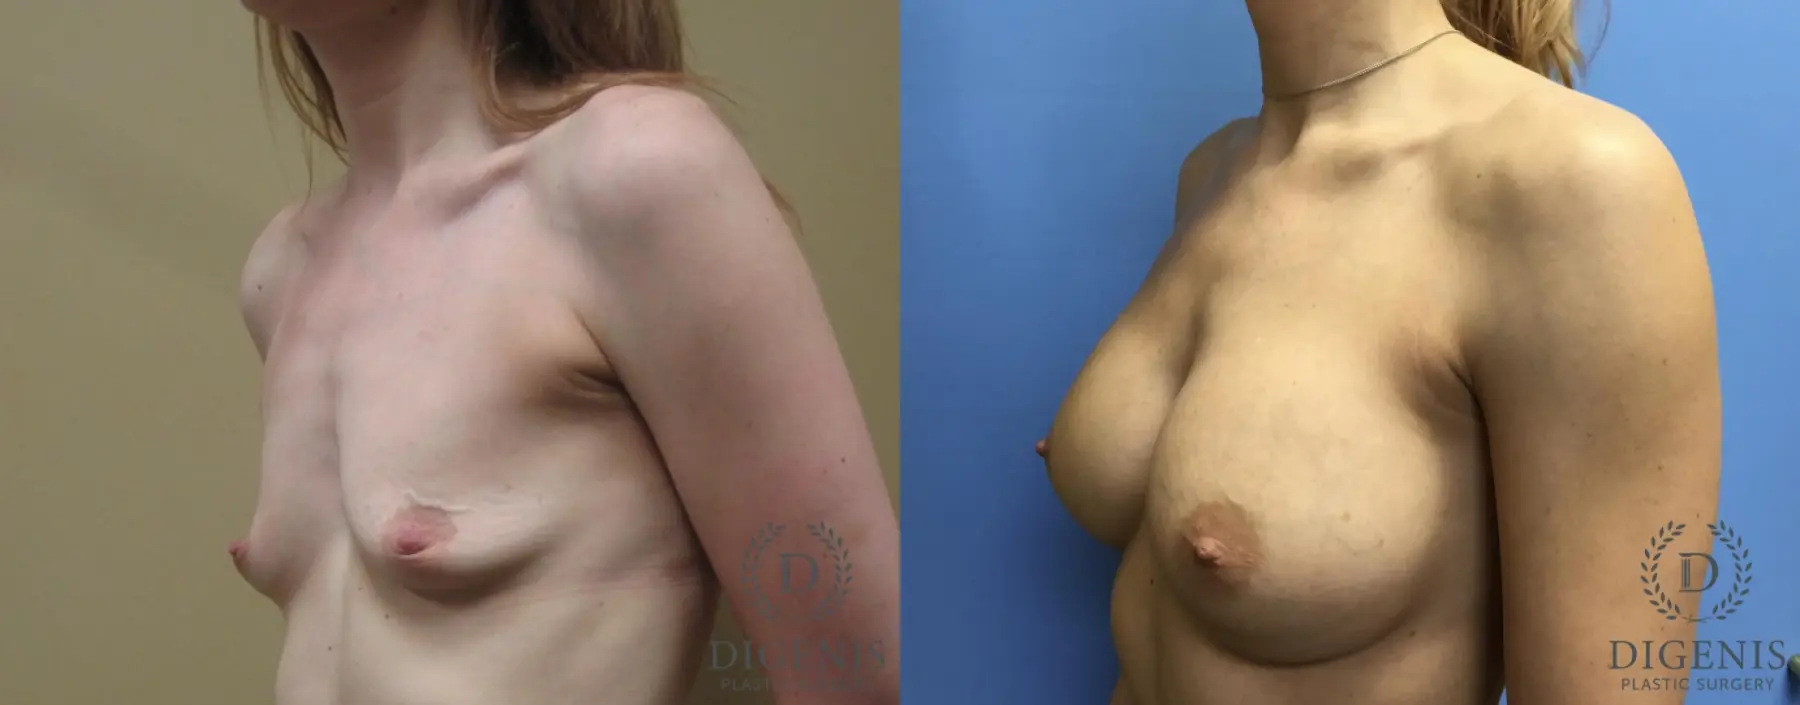 Breast Augmentation: Patient 3 - Before and After 4